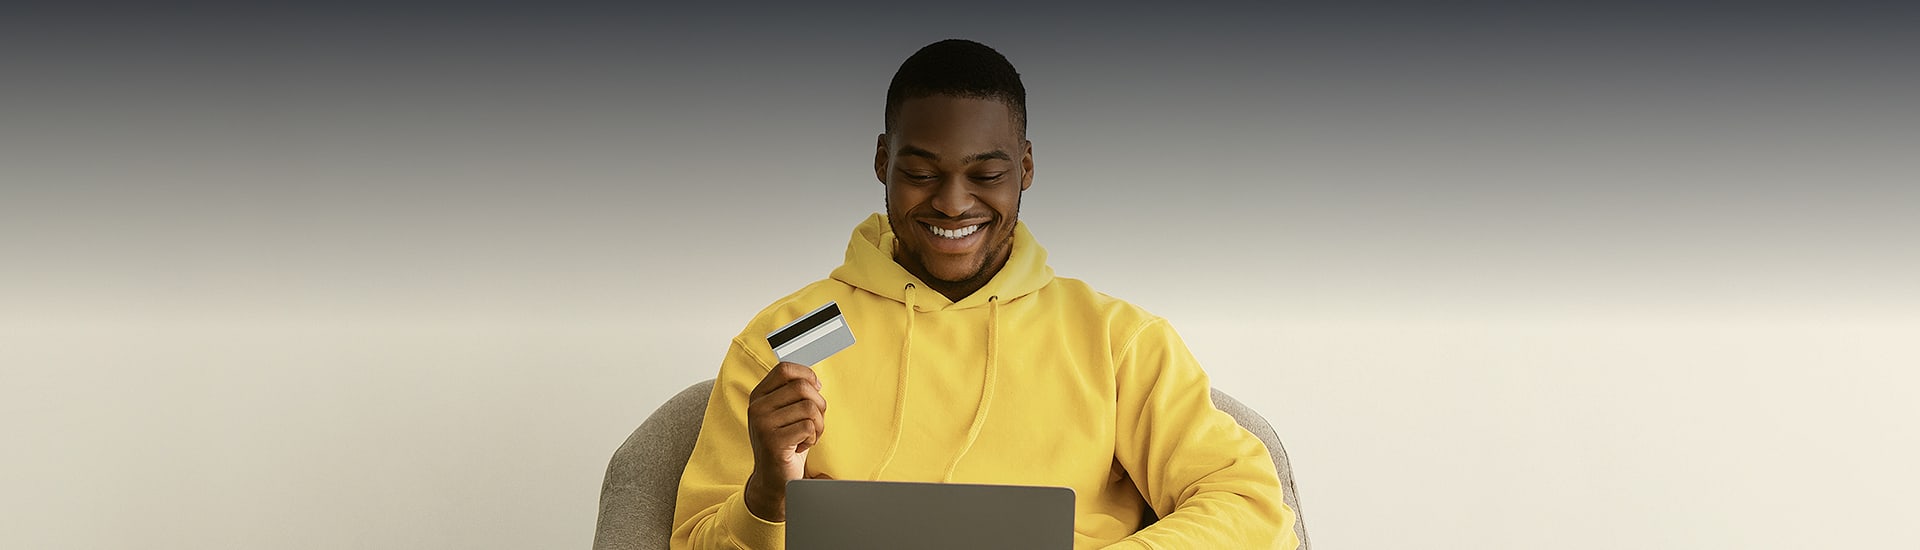 man wearing yellow sweater holding credit card and laptop